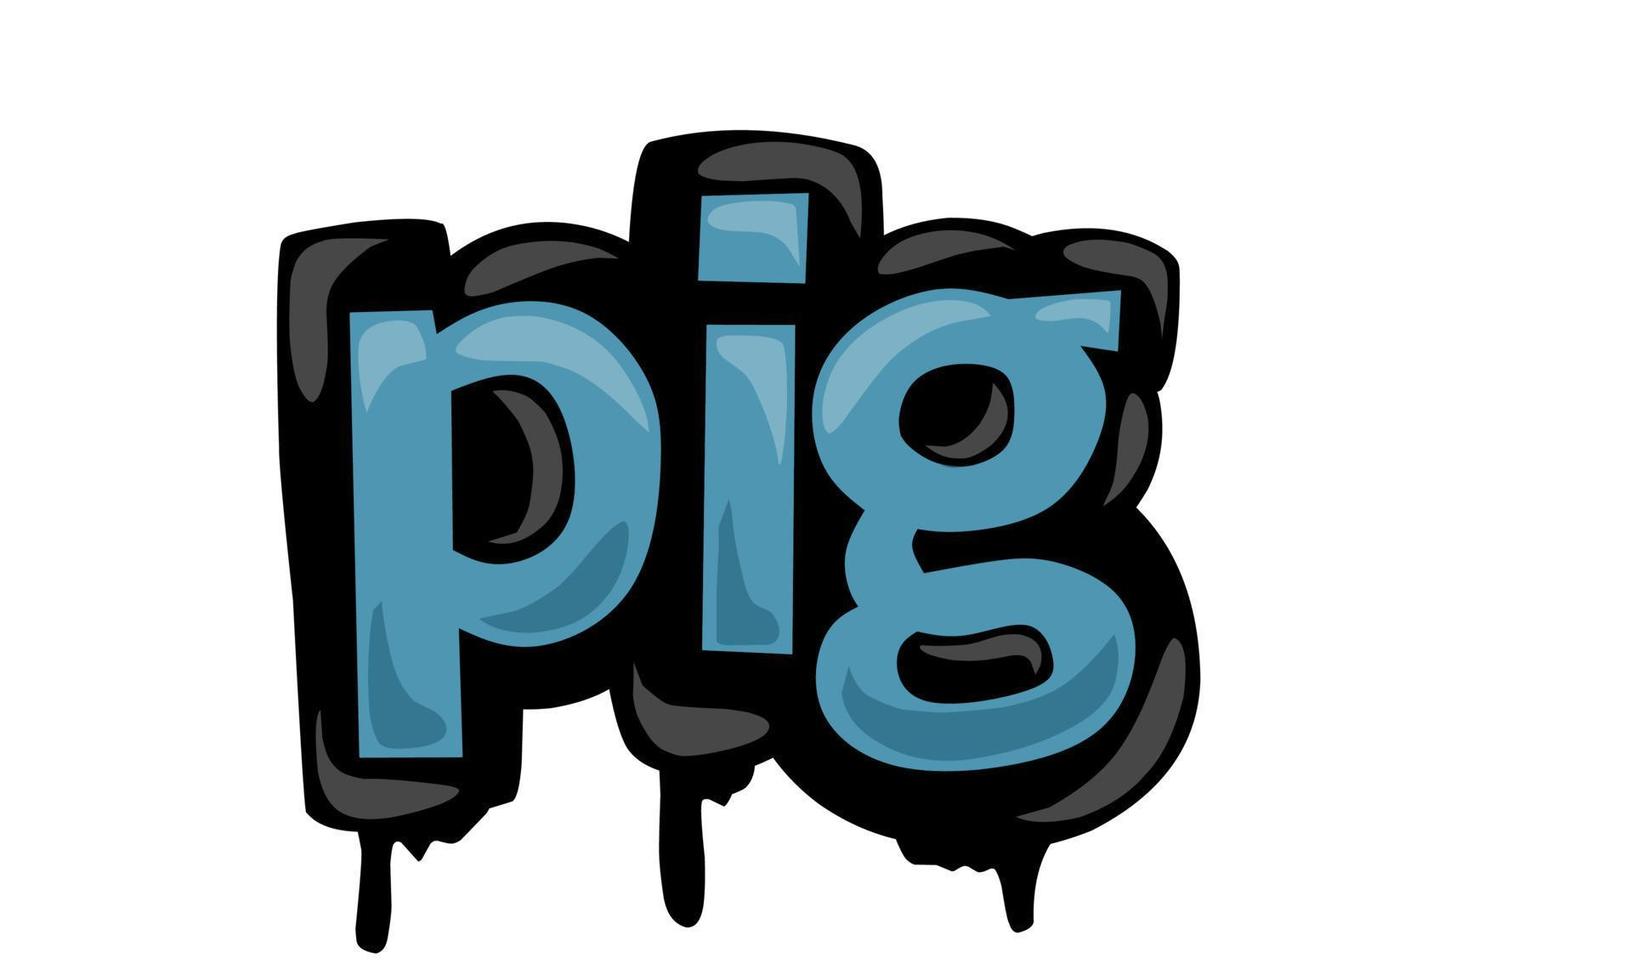 PIG  writing vector design on white background